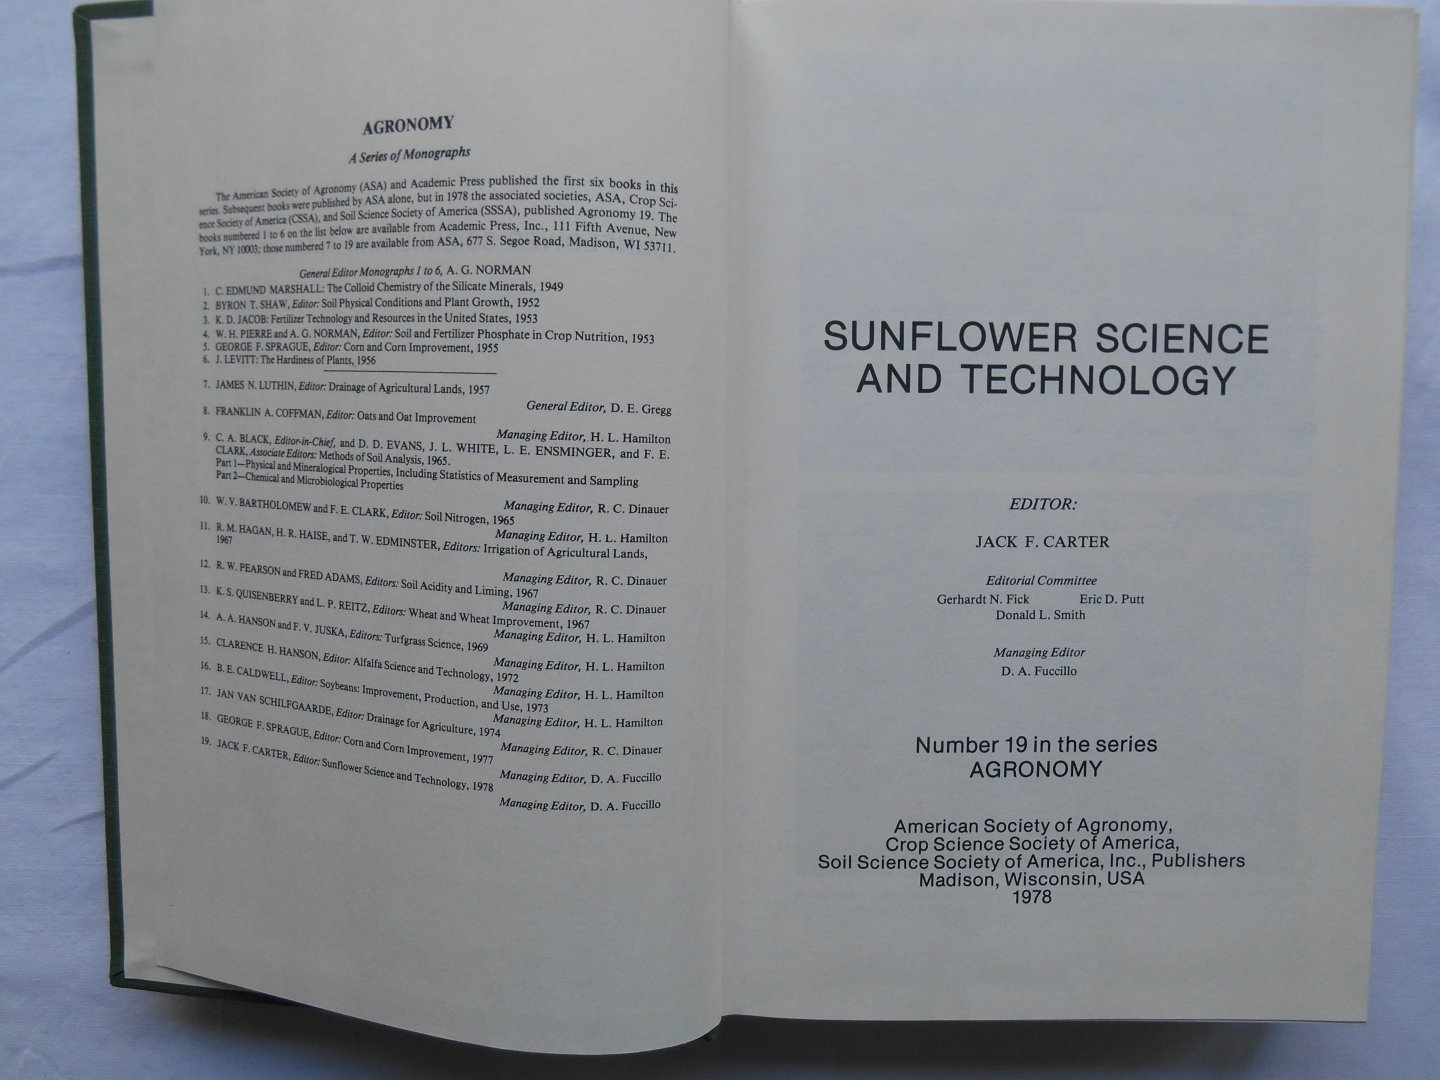 Carter, Jack F. - Sunflower science and technology